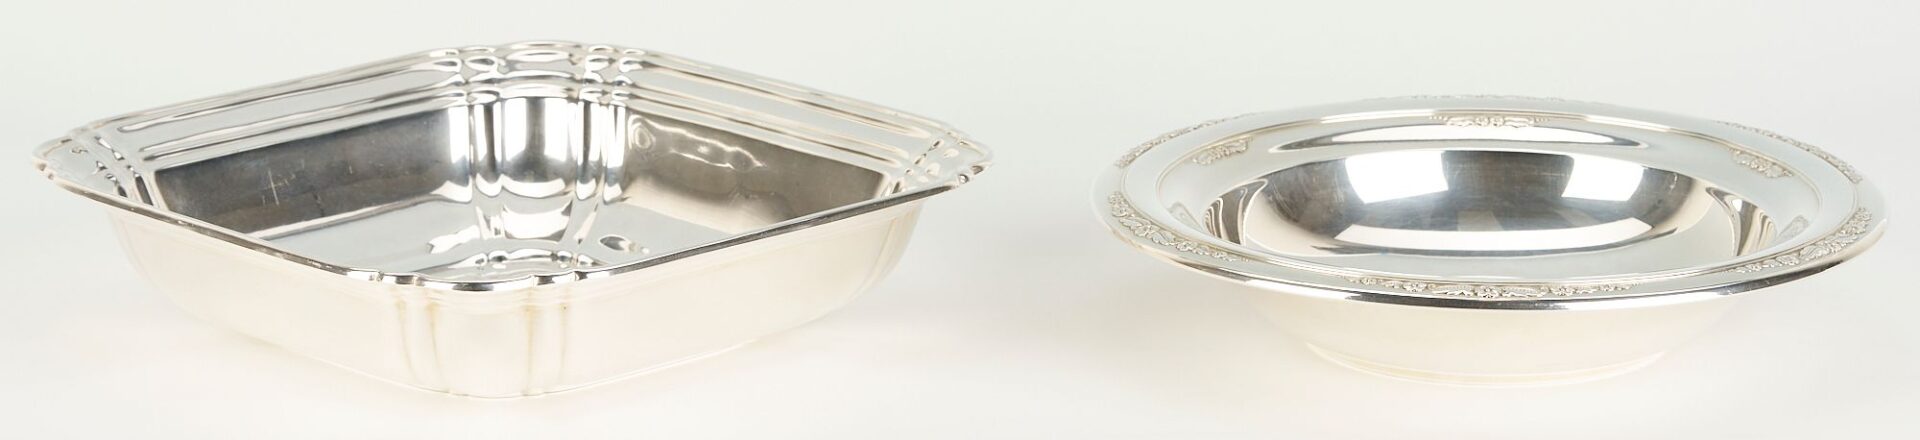 Lot 1068: 2 Sterling Serving Bowls: Wallace Chippendale & International Courtship